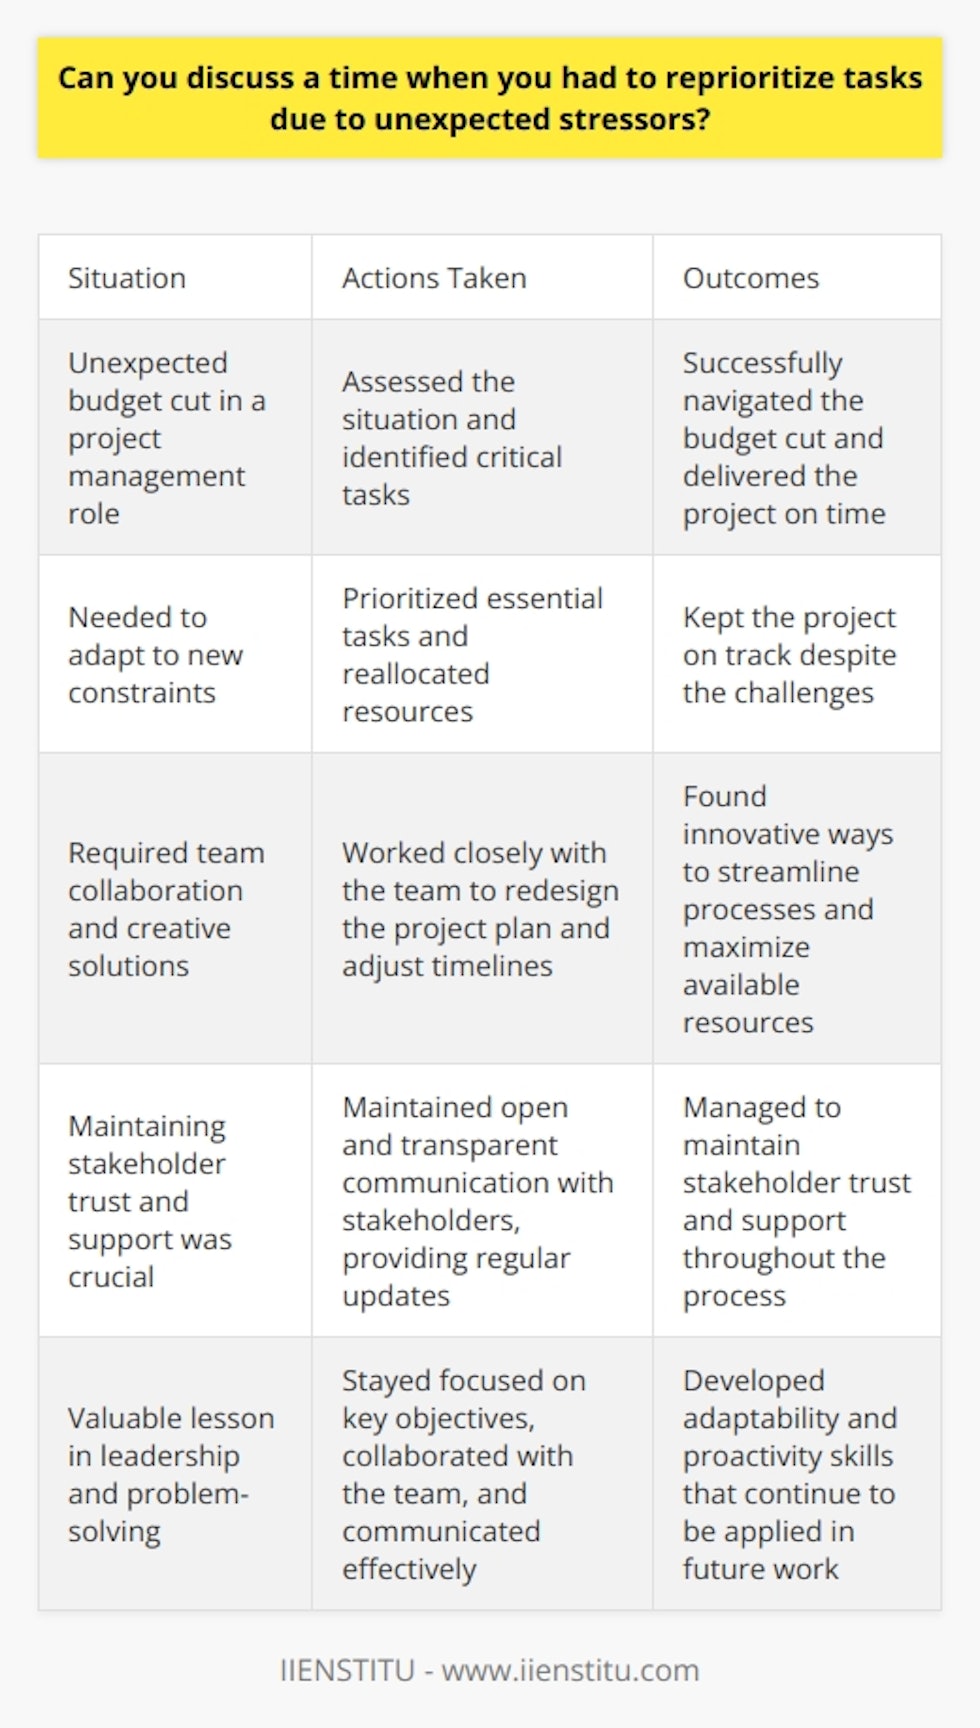 In my previous role as a project manager, I encountered an unexpected budget cut that required immediate action. I quickly assessed the situation and identified the most critical tasks that needed to be completed to ensure the projects success. I communicated with my team and stakeholders to explain the changes and gain their support. Prioritizing Essential Tasks To adapt to the new constraints, I prioritized the tasks that were essential to delivering the projects core objectives. This meant temporarily putting some less critical activities on hold and reallocating resources to the most important work streams. It wasnt an easy decision, but it was necessary to keep the project on track. Collaborating with the Team I worked closely with my team to redesign our project plan and adjust our timelines. We brainstormed creative solutions to overcome the challenges posed by the budget reduction. By fostering a collaborative and supportive environment, we were able to find innovative ways to streamline our processes and maximize our available resources. Communicating with Stakeholders Throughout the process, I maintained open and transparent communication with our stakeholders. I provided regular updates on our progress, explained the reasons behind the changes, and set realistic expectations. By keeping everyone informed and engaged, I was able to maintain their trust and support, even in the face of adversity. Lessons Learned This experience taught me the importance of being adaptable and proactive in the face of unexpected challenges. By staying focused on the projects key objectives, collaborating with my team, and communicating effectively with stakeholders, I was able to successfully navigate the budget cut and deliver the project on time and within the revised budget. It was a valuable lesson in leadership and problem-solving that I continue to apply in my work today.